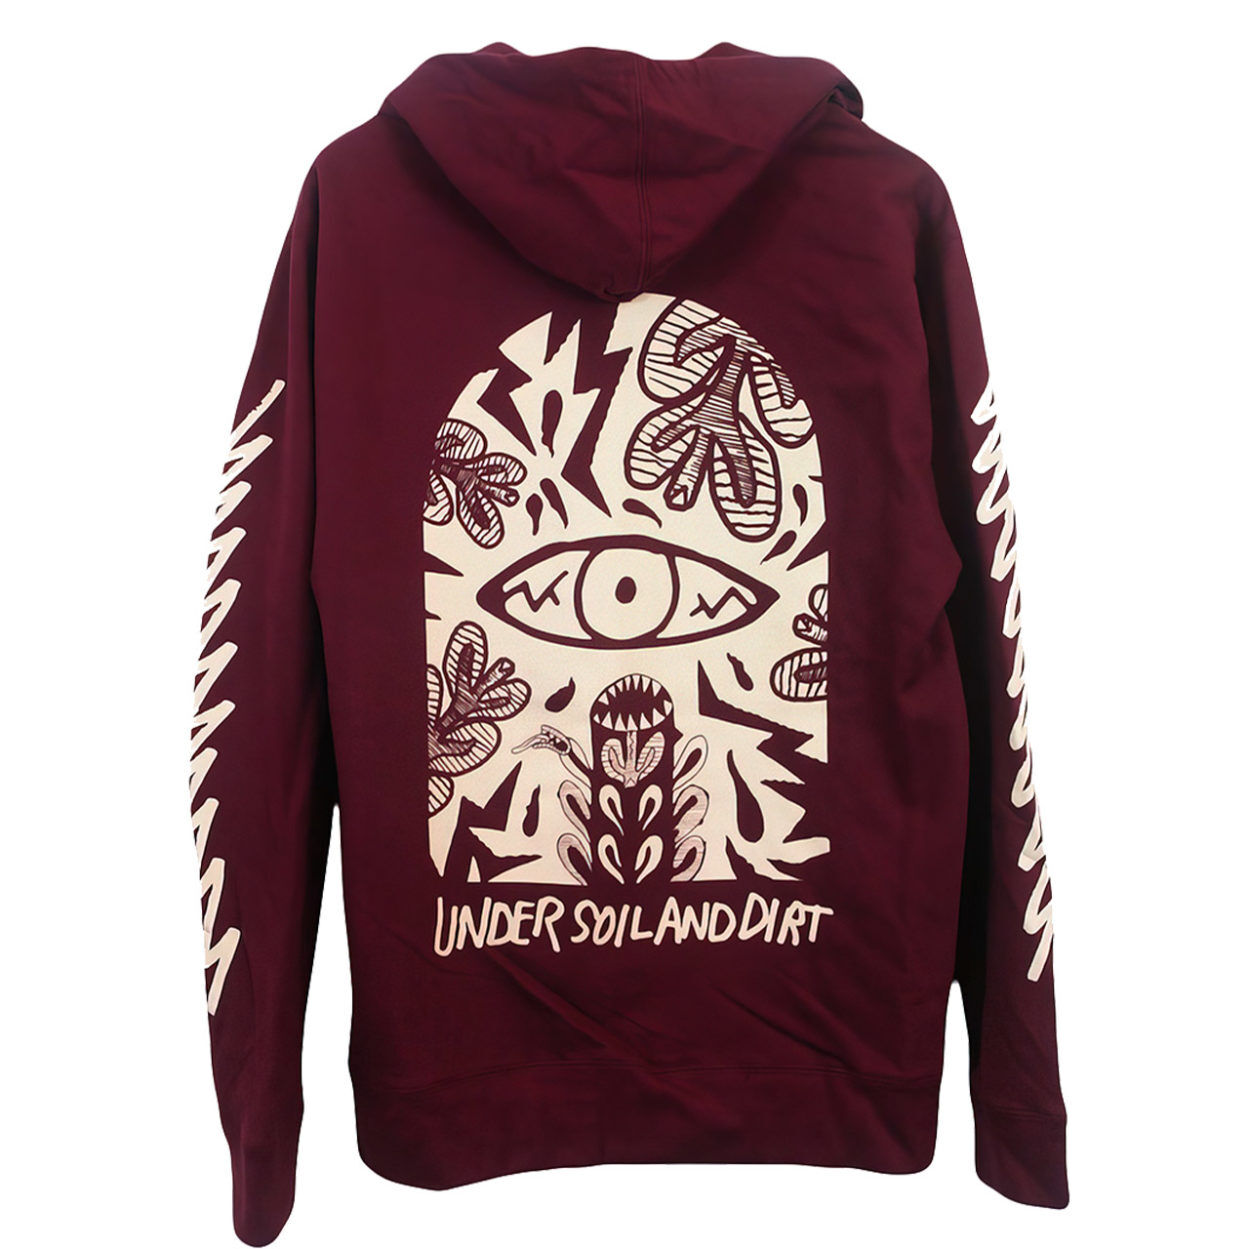 THE STORY SO FAR Eye Pullover Hoodie Back